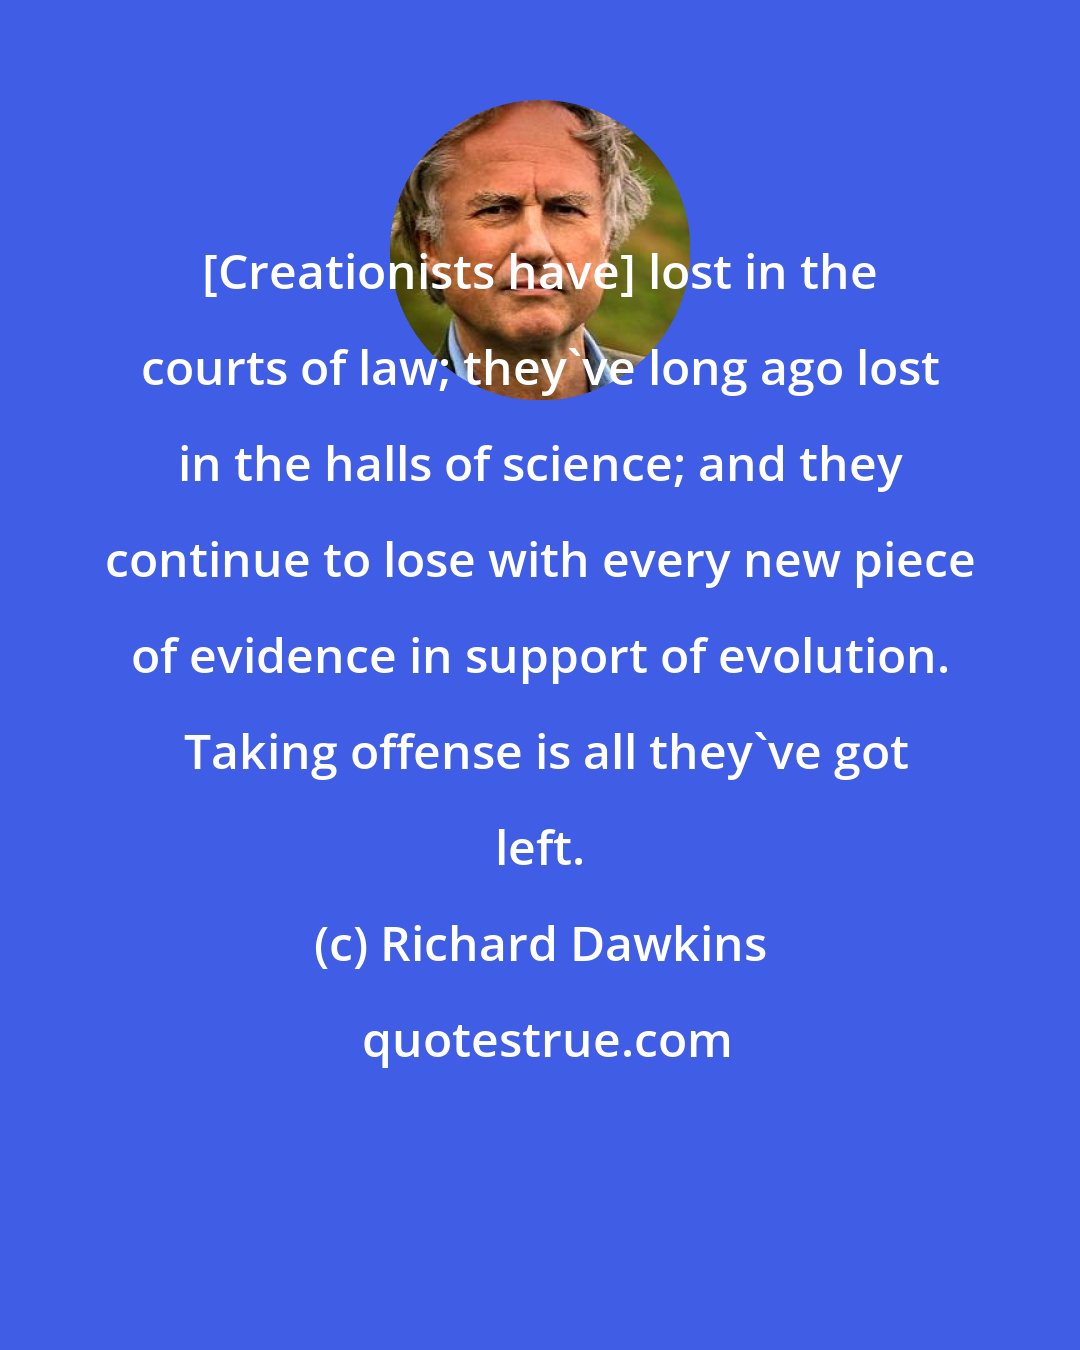 Richard Dawkins: [Creationists have] lost in the courts of law; they've long ago lost in the halls of science; and they continue to lose with every new piece of evidence in support of evolution.  Taking offense is all they've got left.